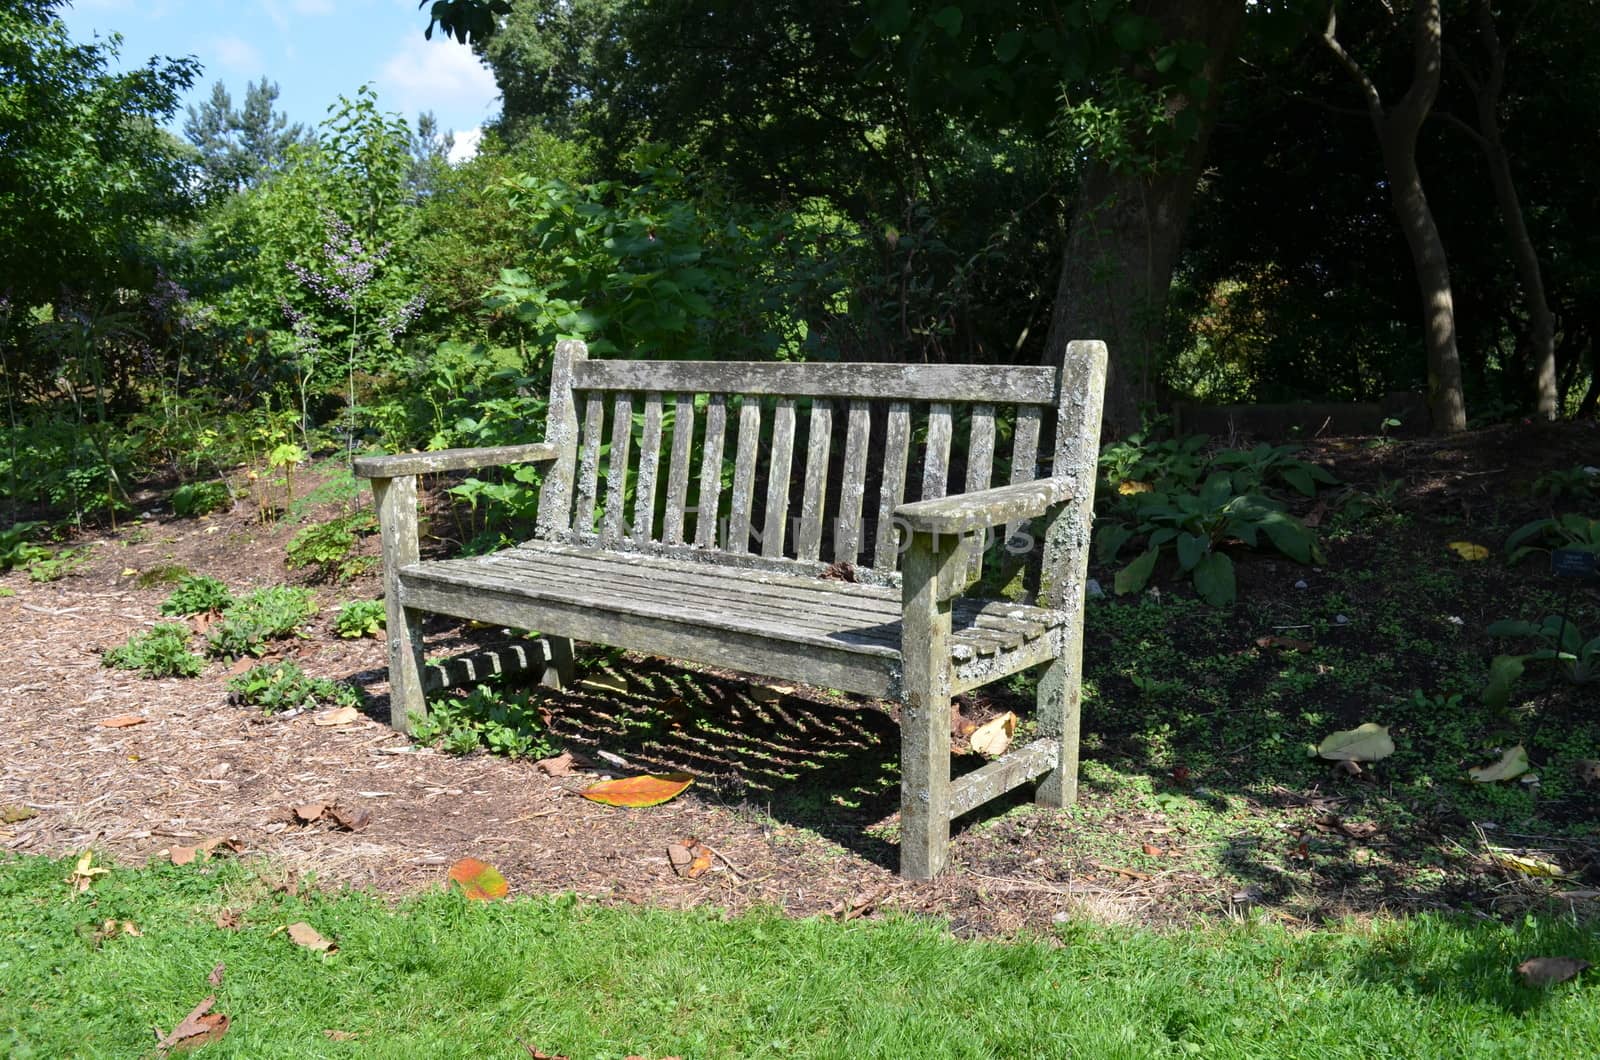 A wooden bench set in a parkland setting in the Summer of 2013, England.